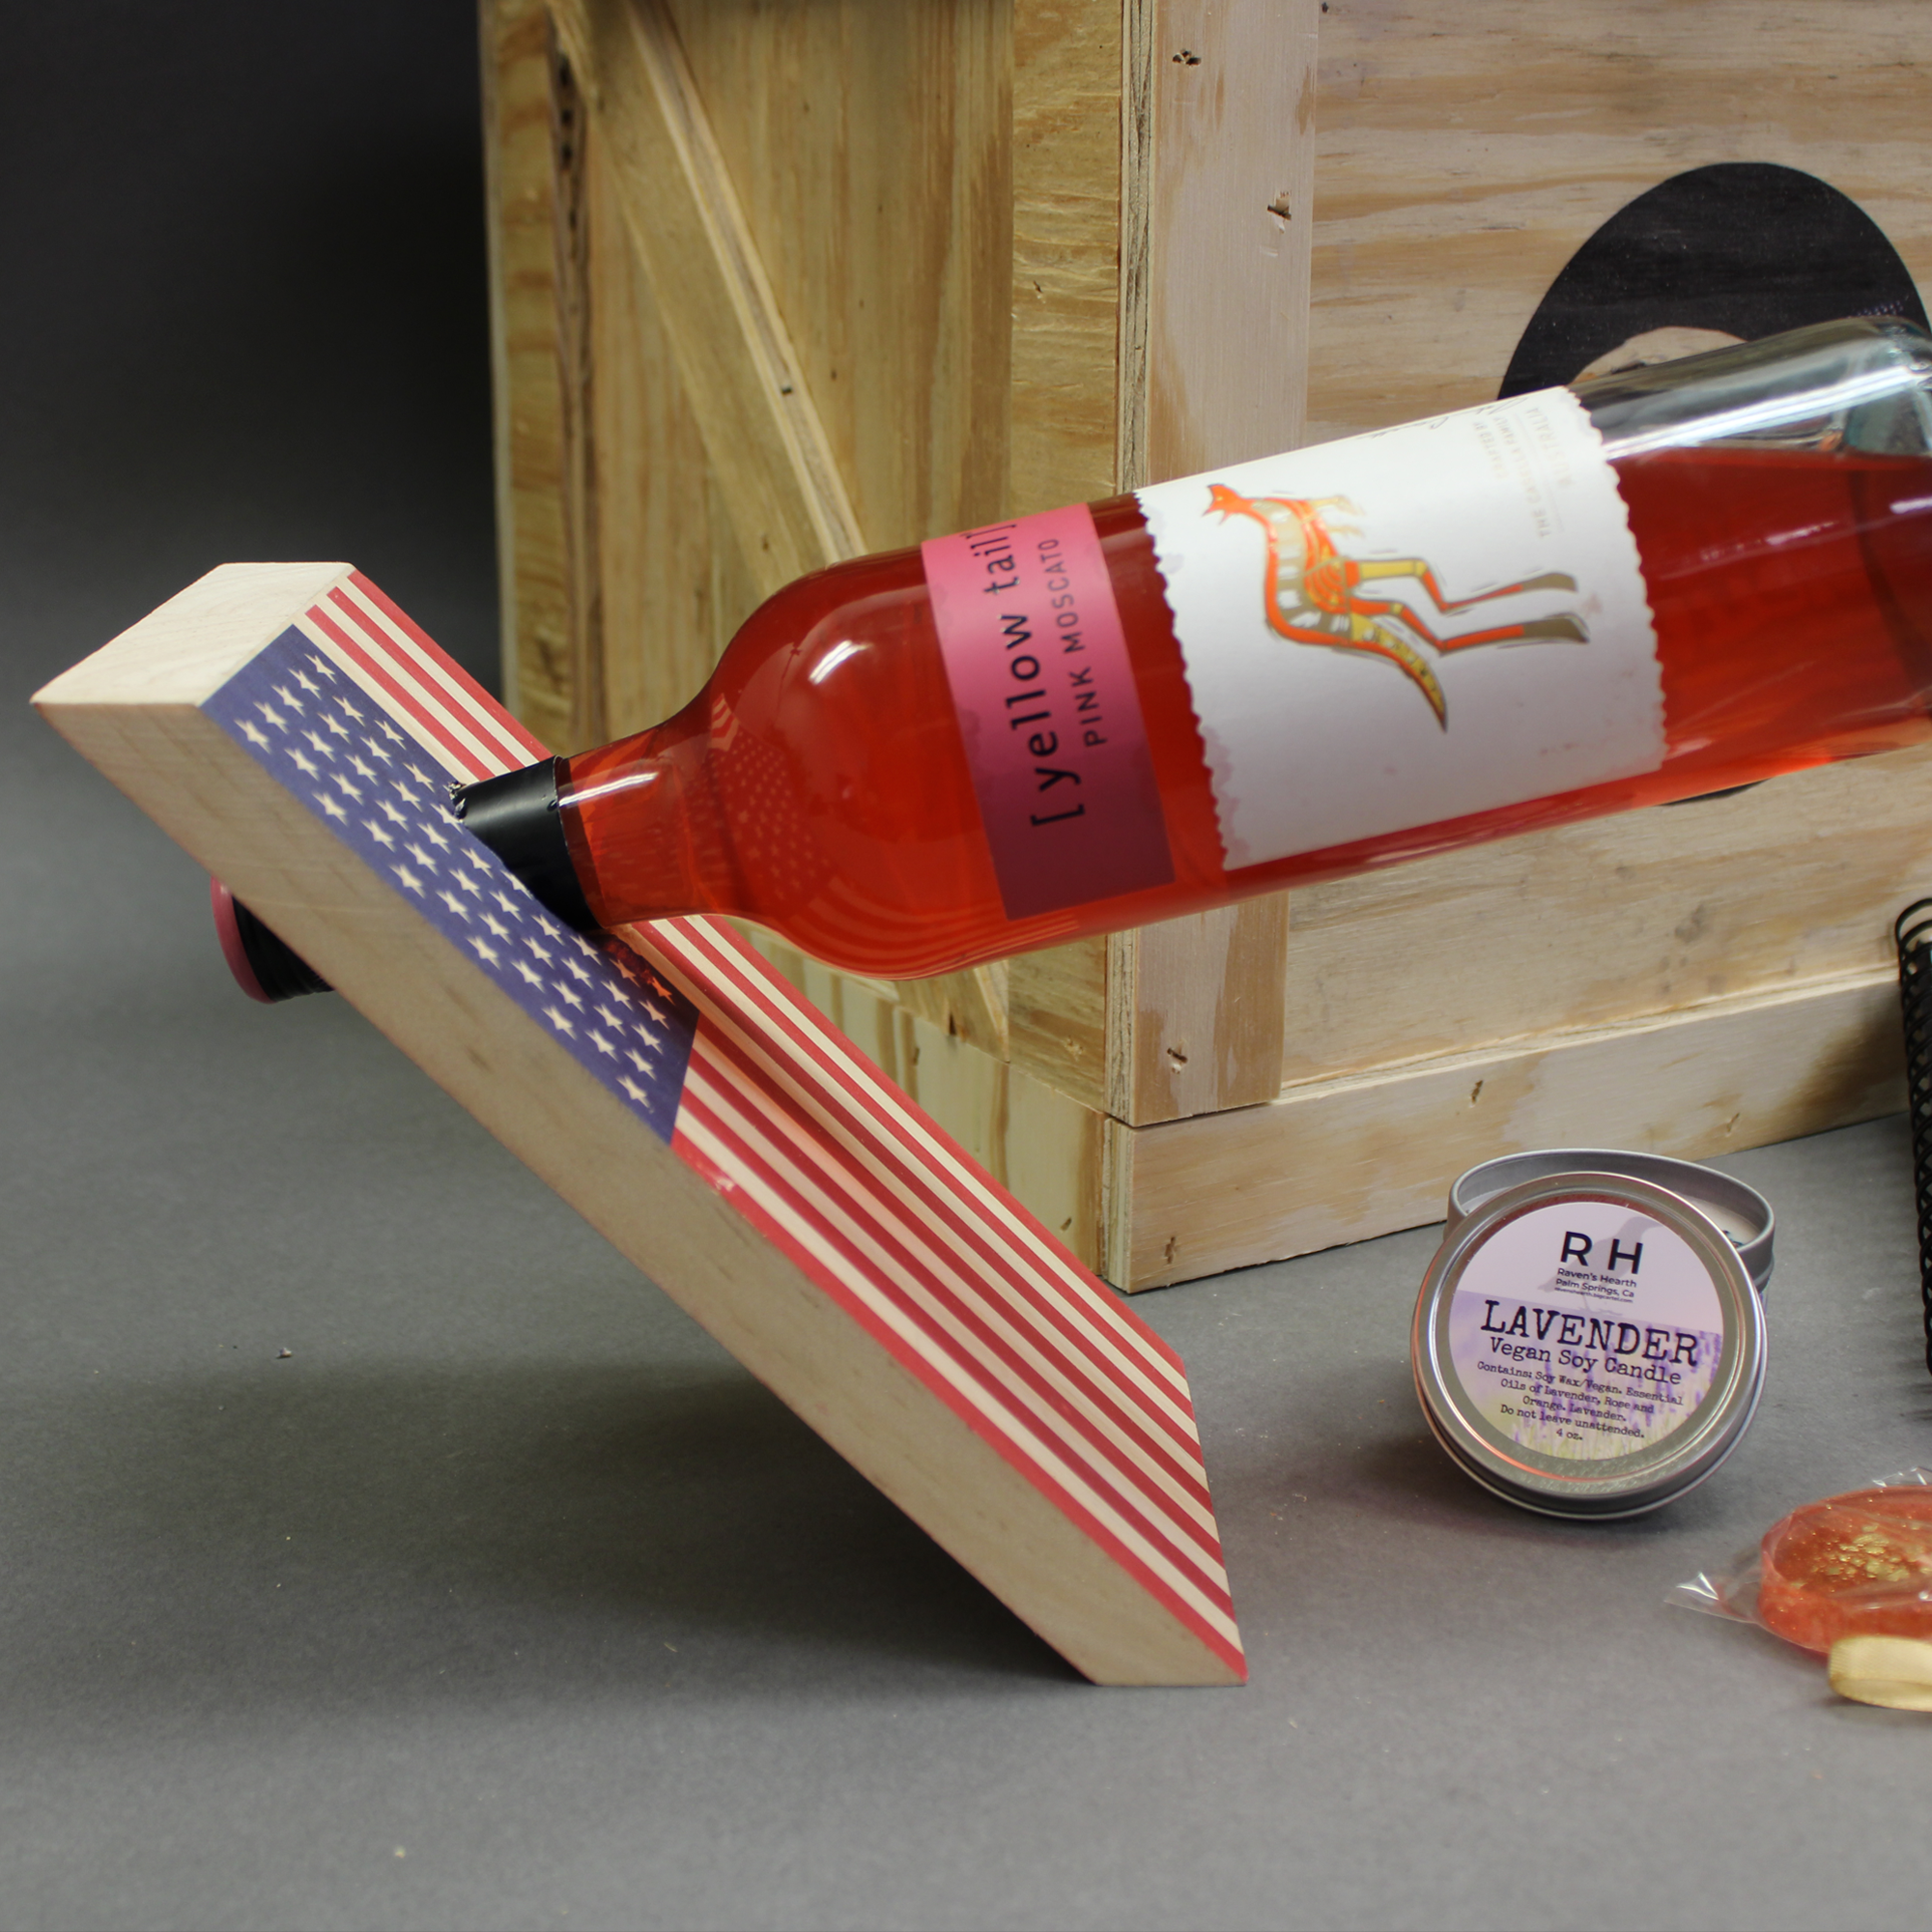 "Wine About It" Crate